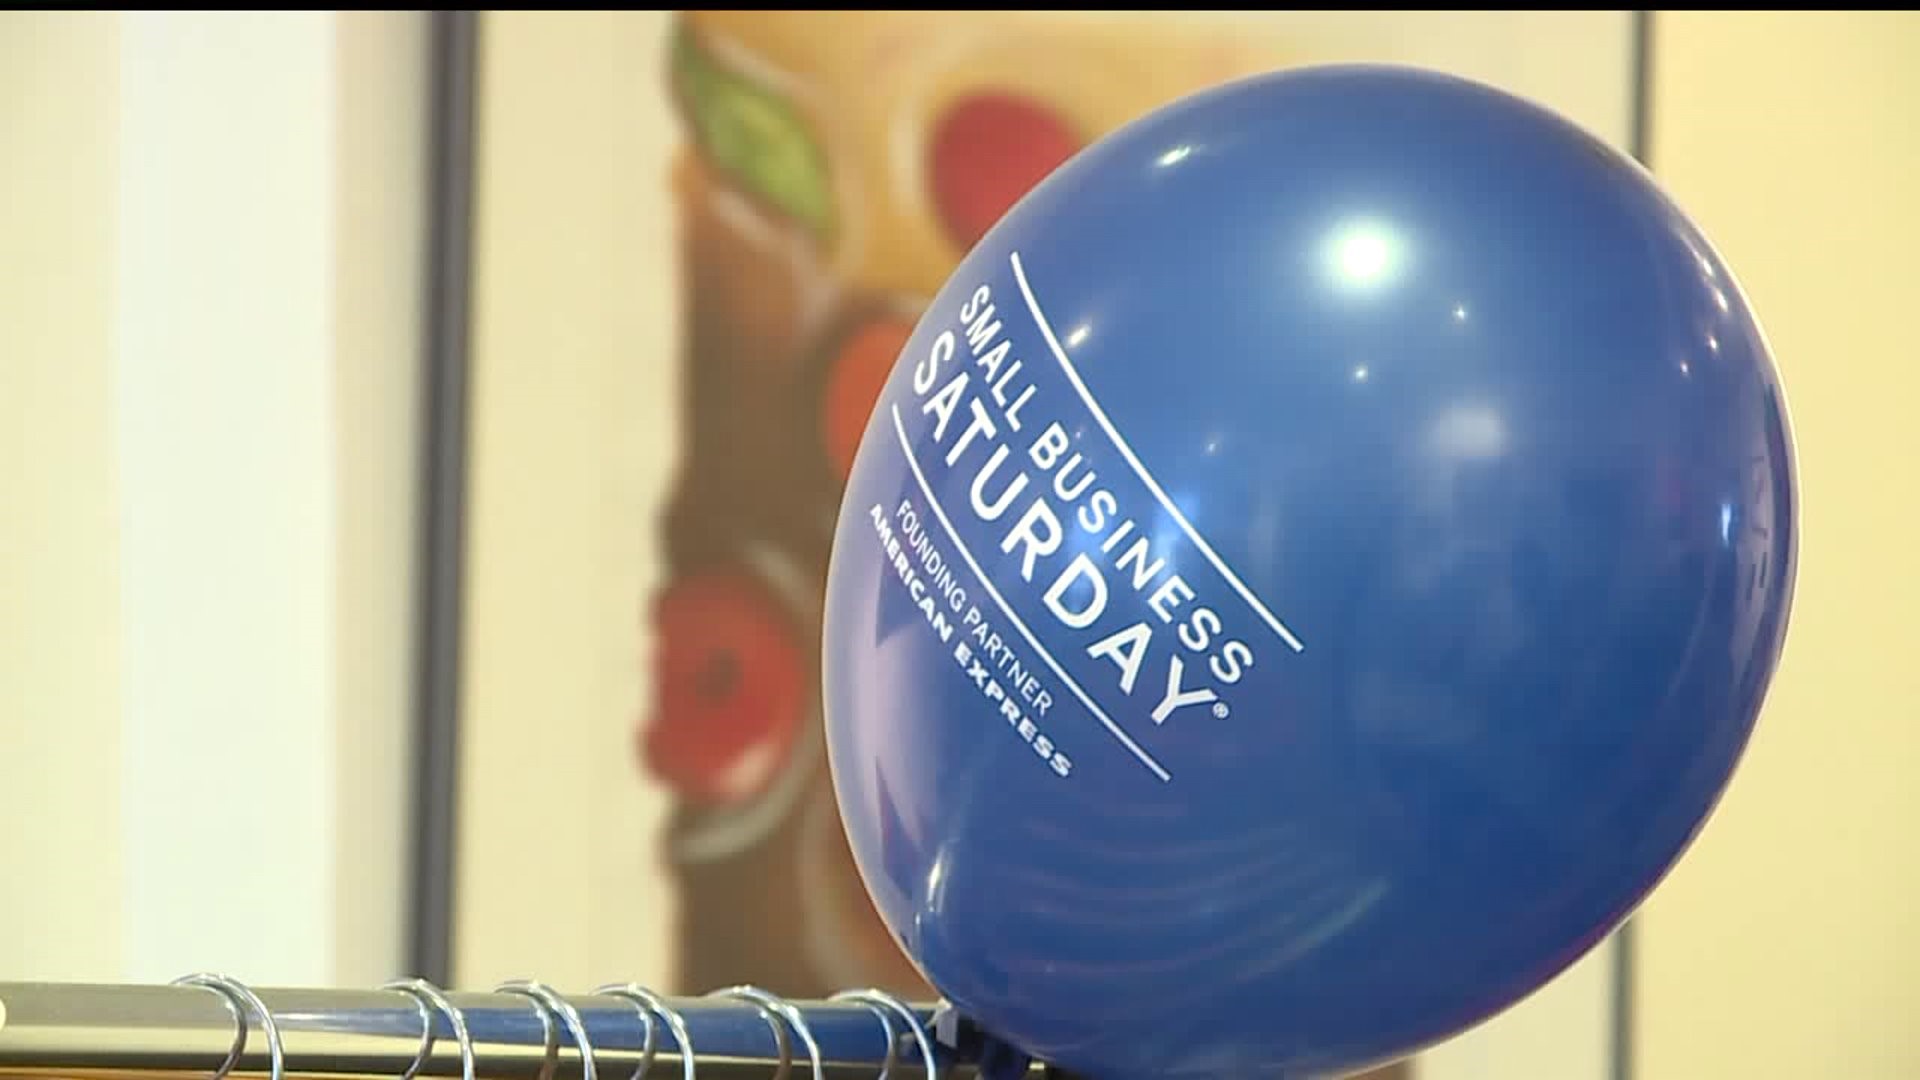 Small business owners in York wait all year for Small Business Saturday, encourage neighbors to `shop small`